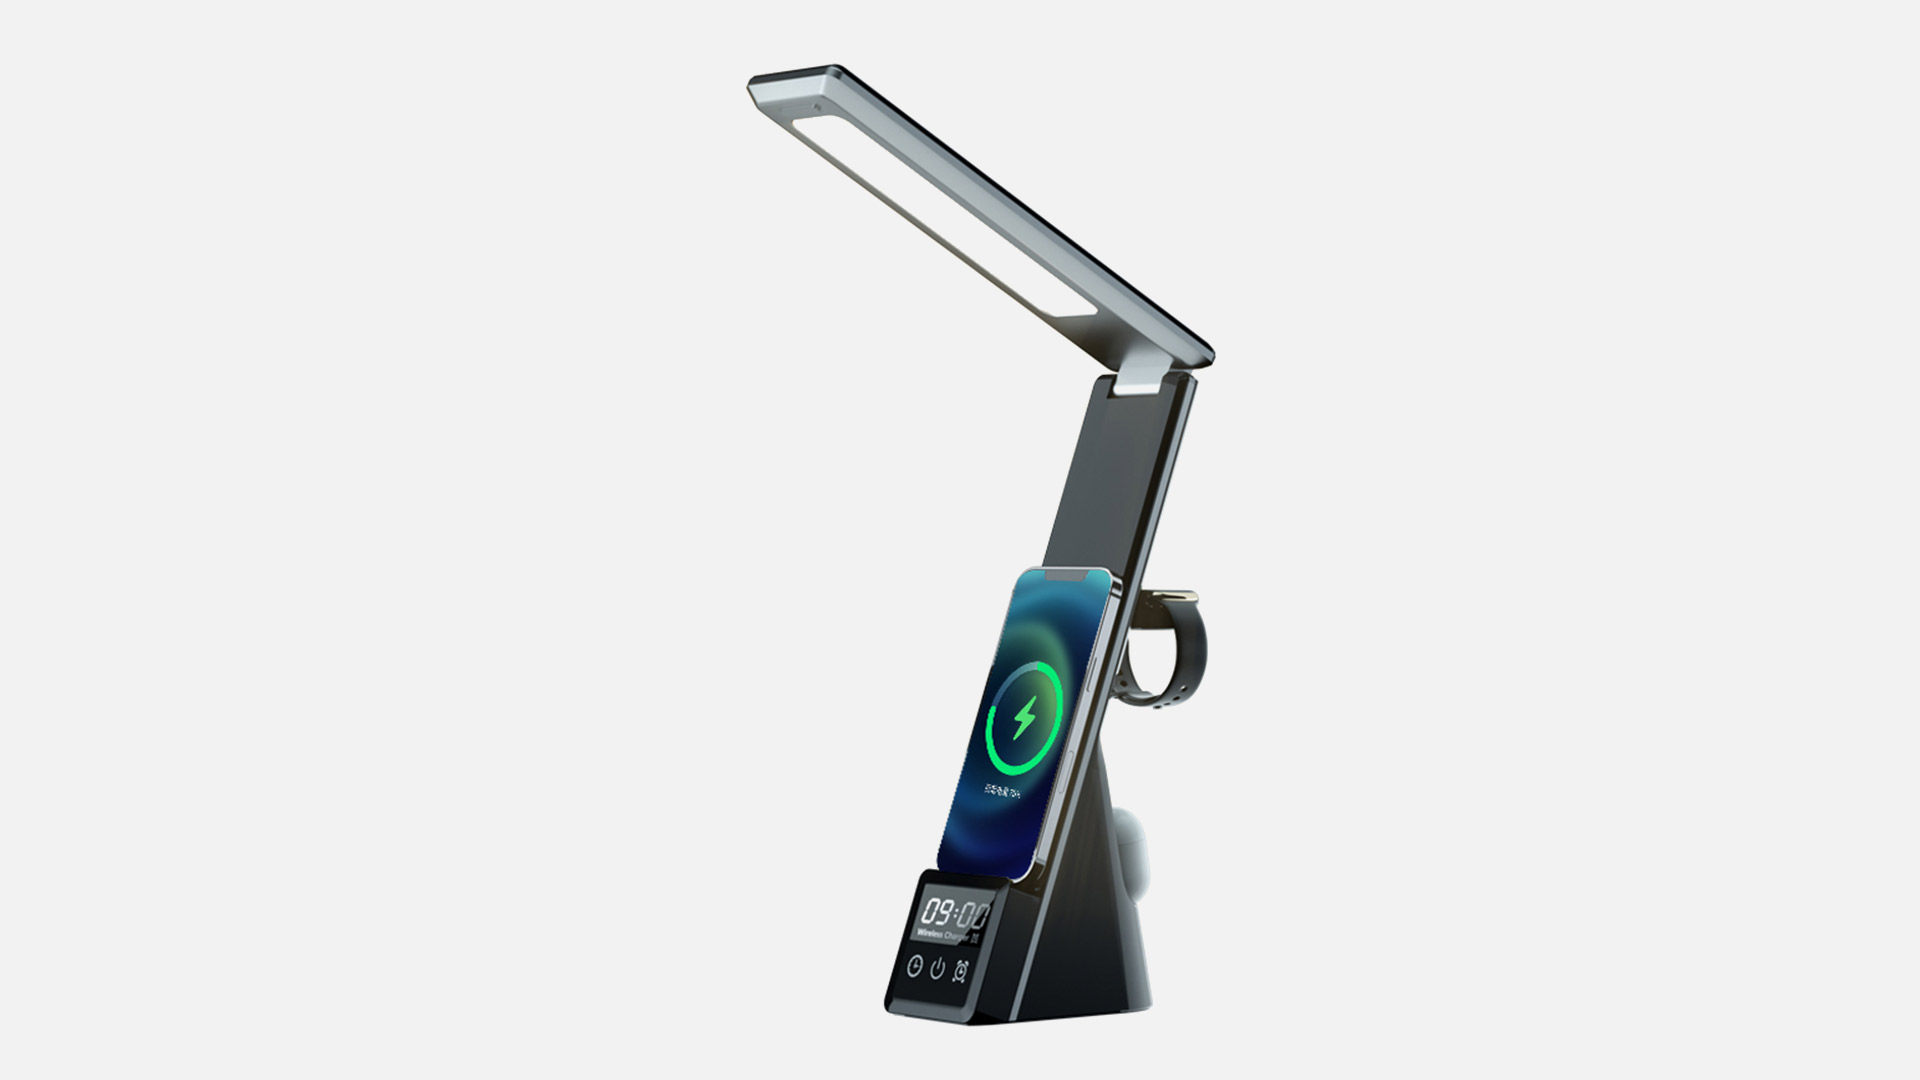 LED Lamp Phone Charging Stand